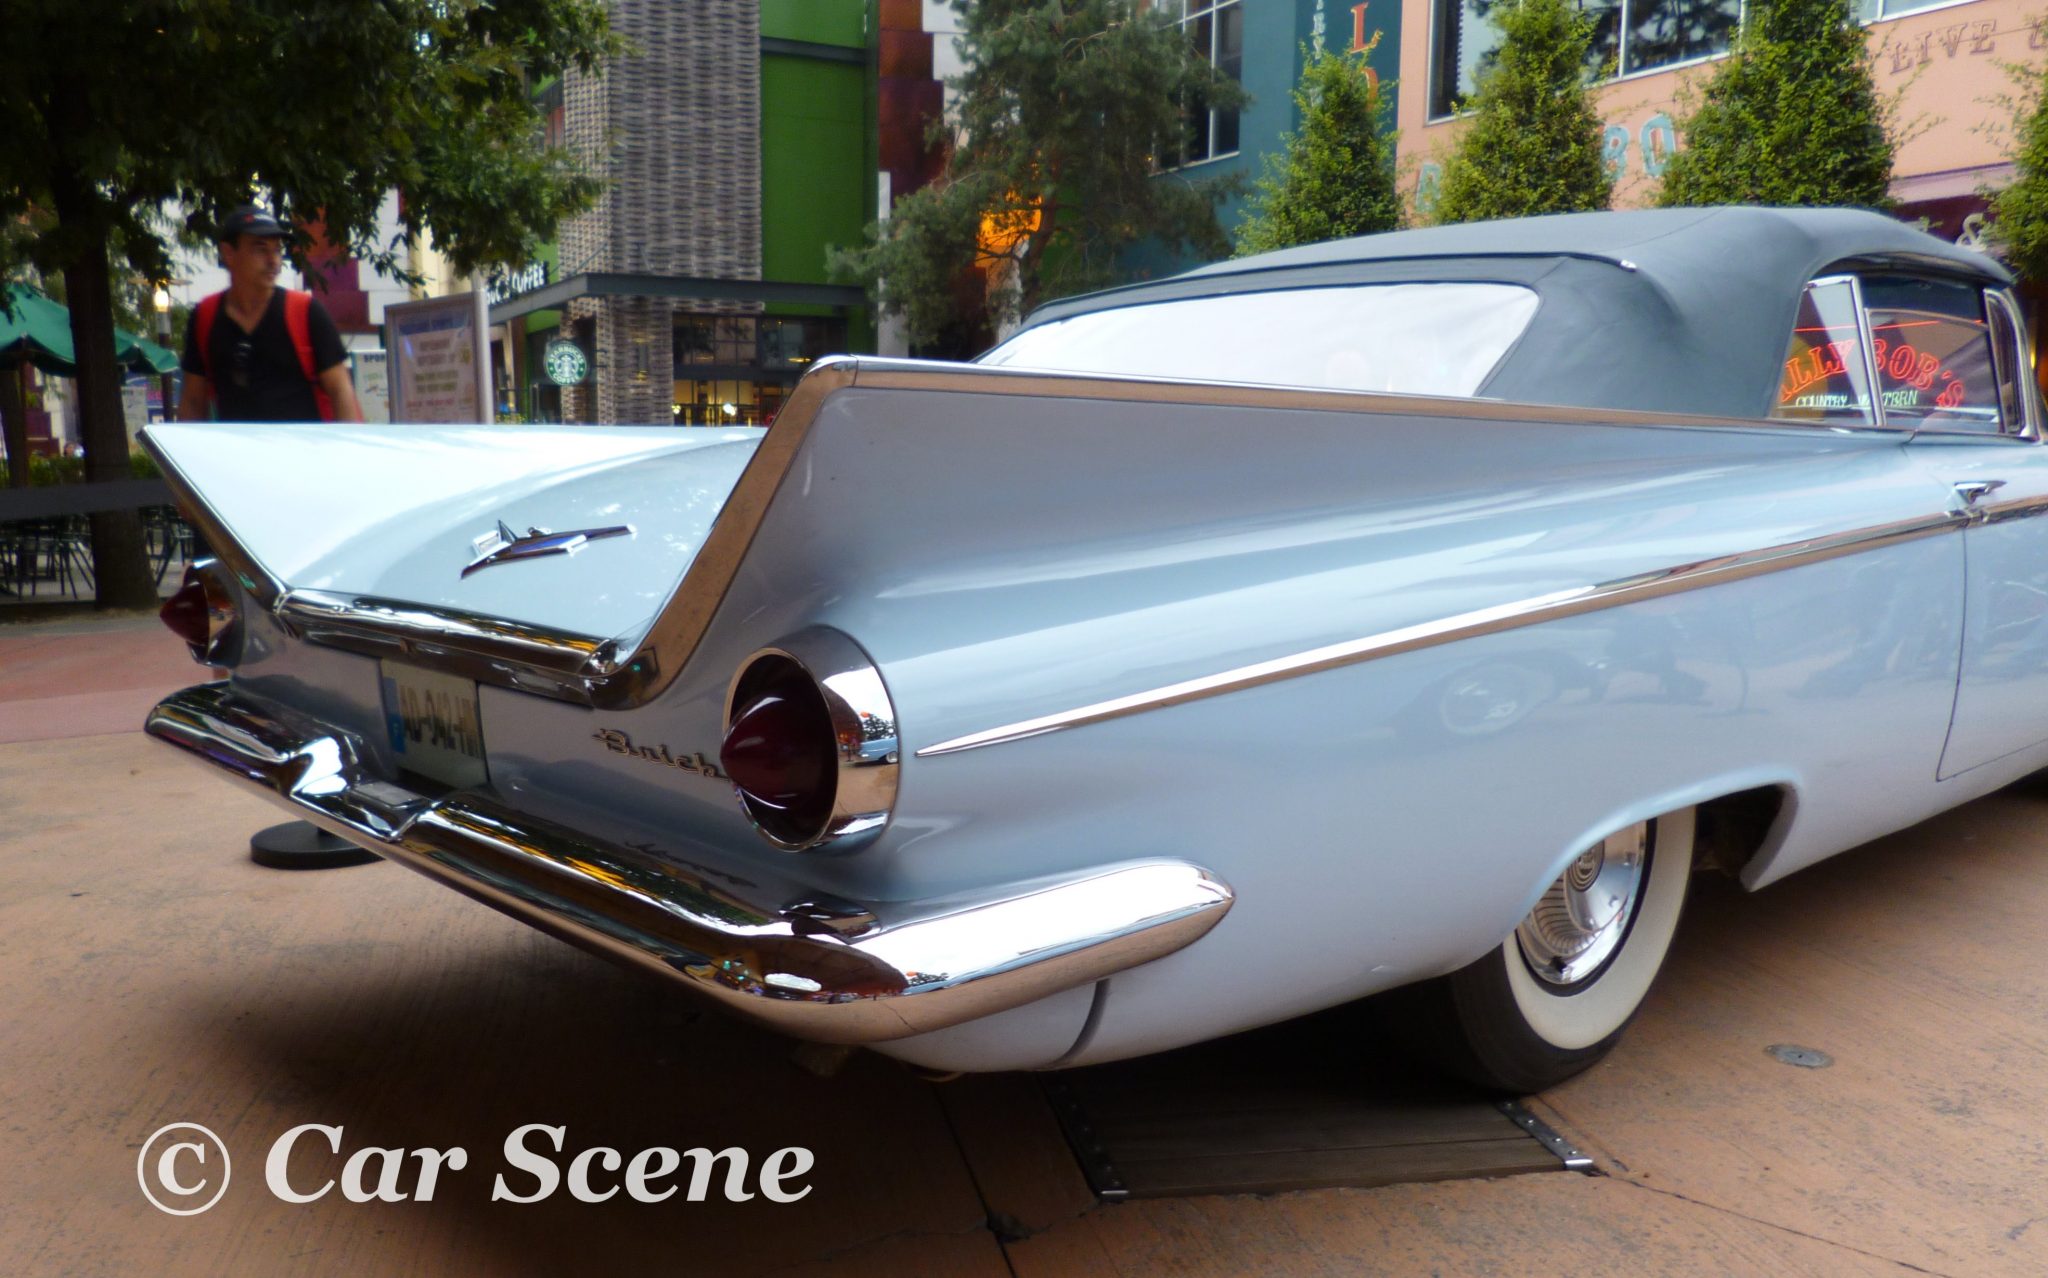 1959 Buick Le Sabre Convertible rear side view